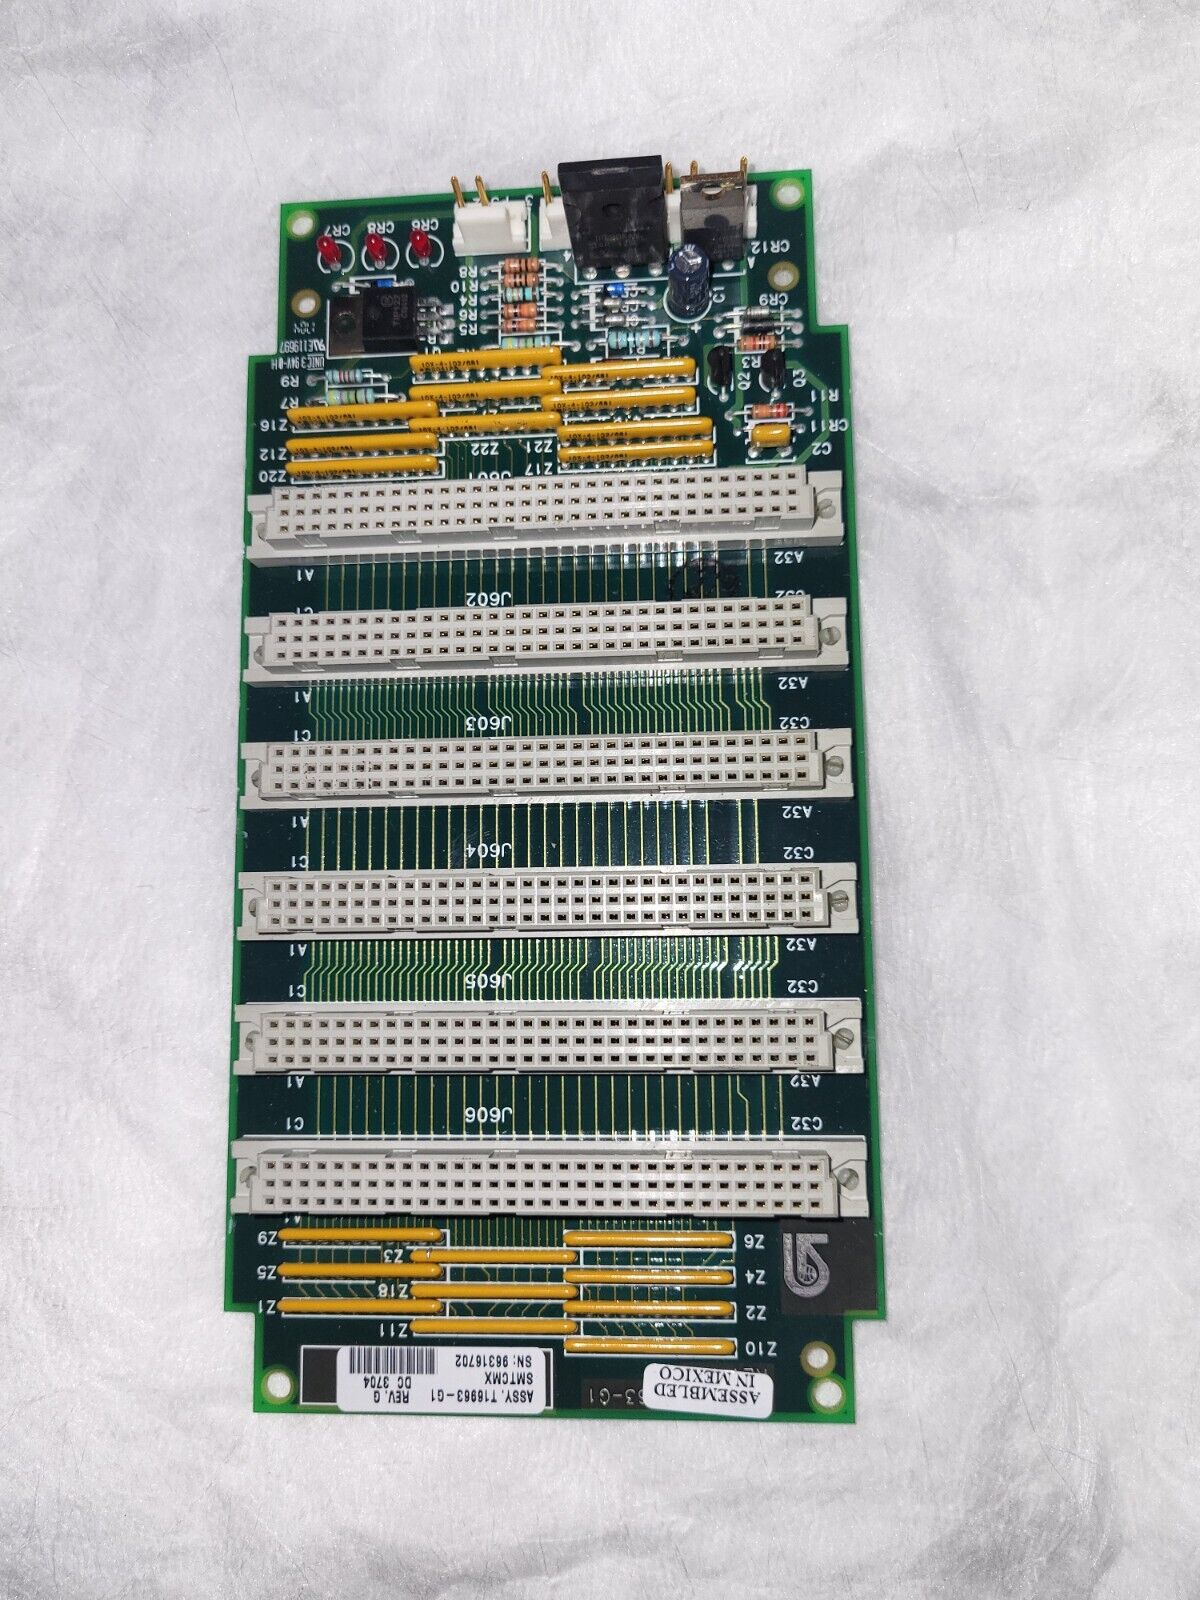 Veeder-Root/Gilbarco TS-1000 / PAM 1000 T16963-G1R Back Plane Board Controller